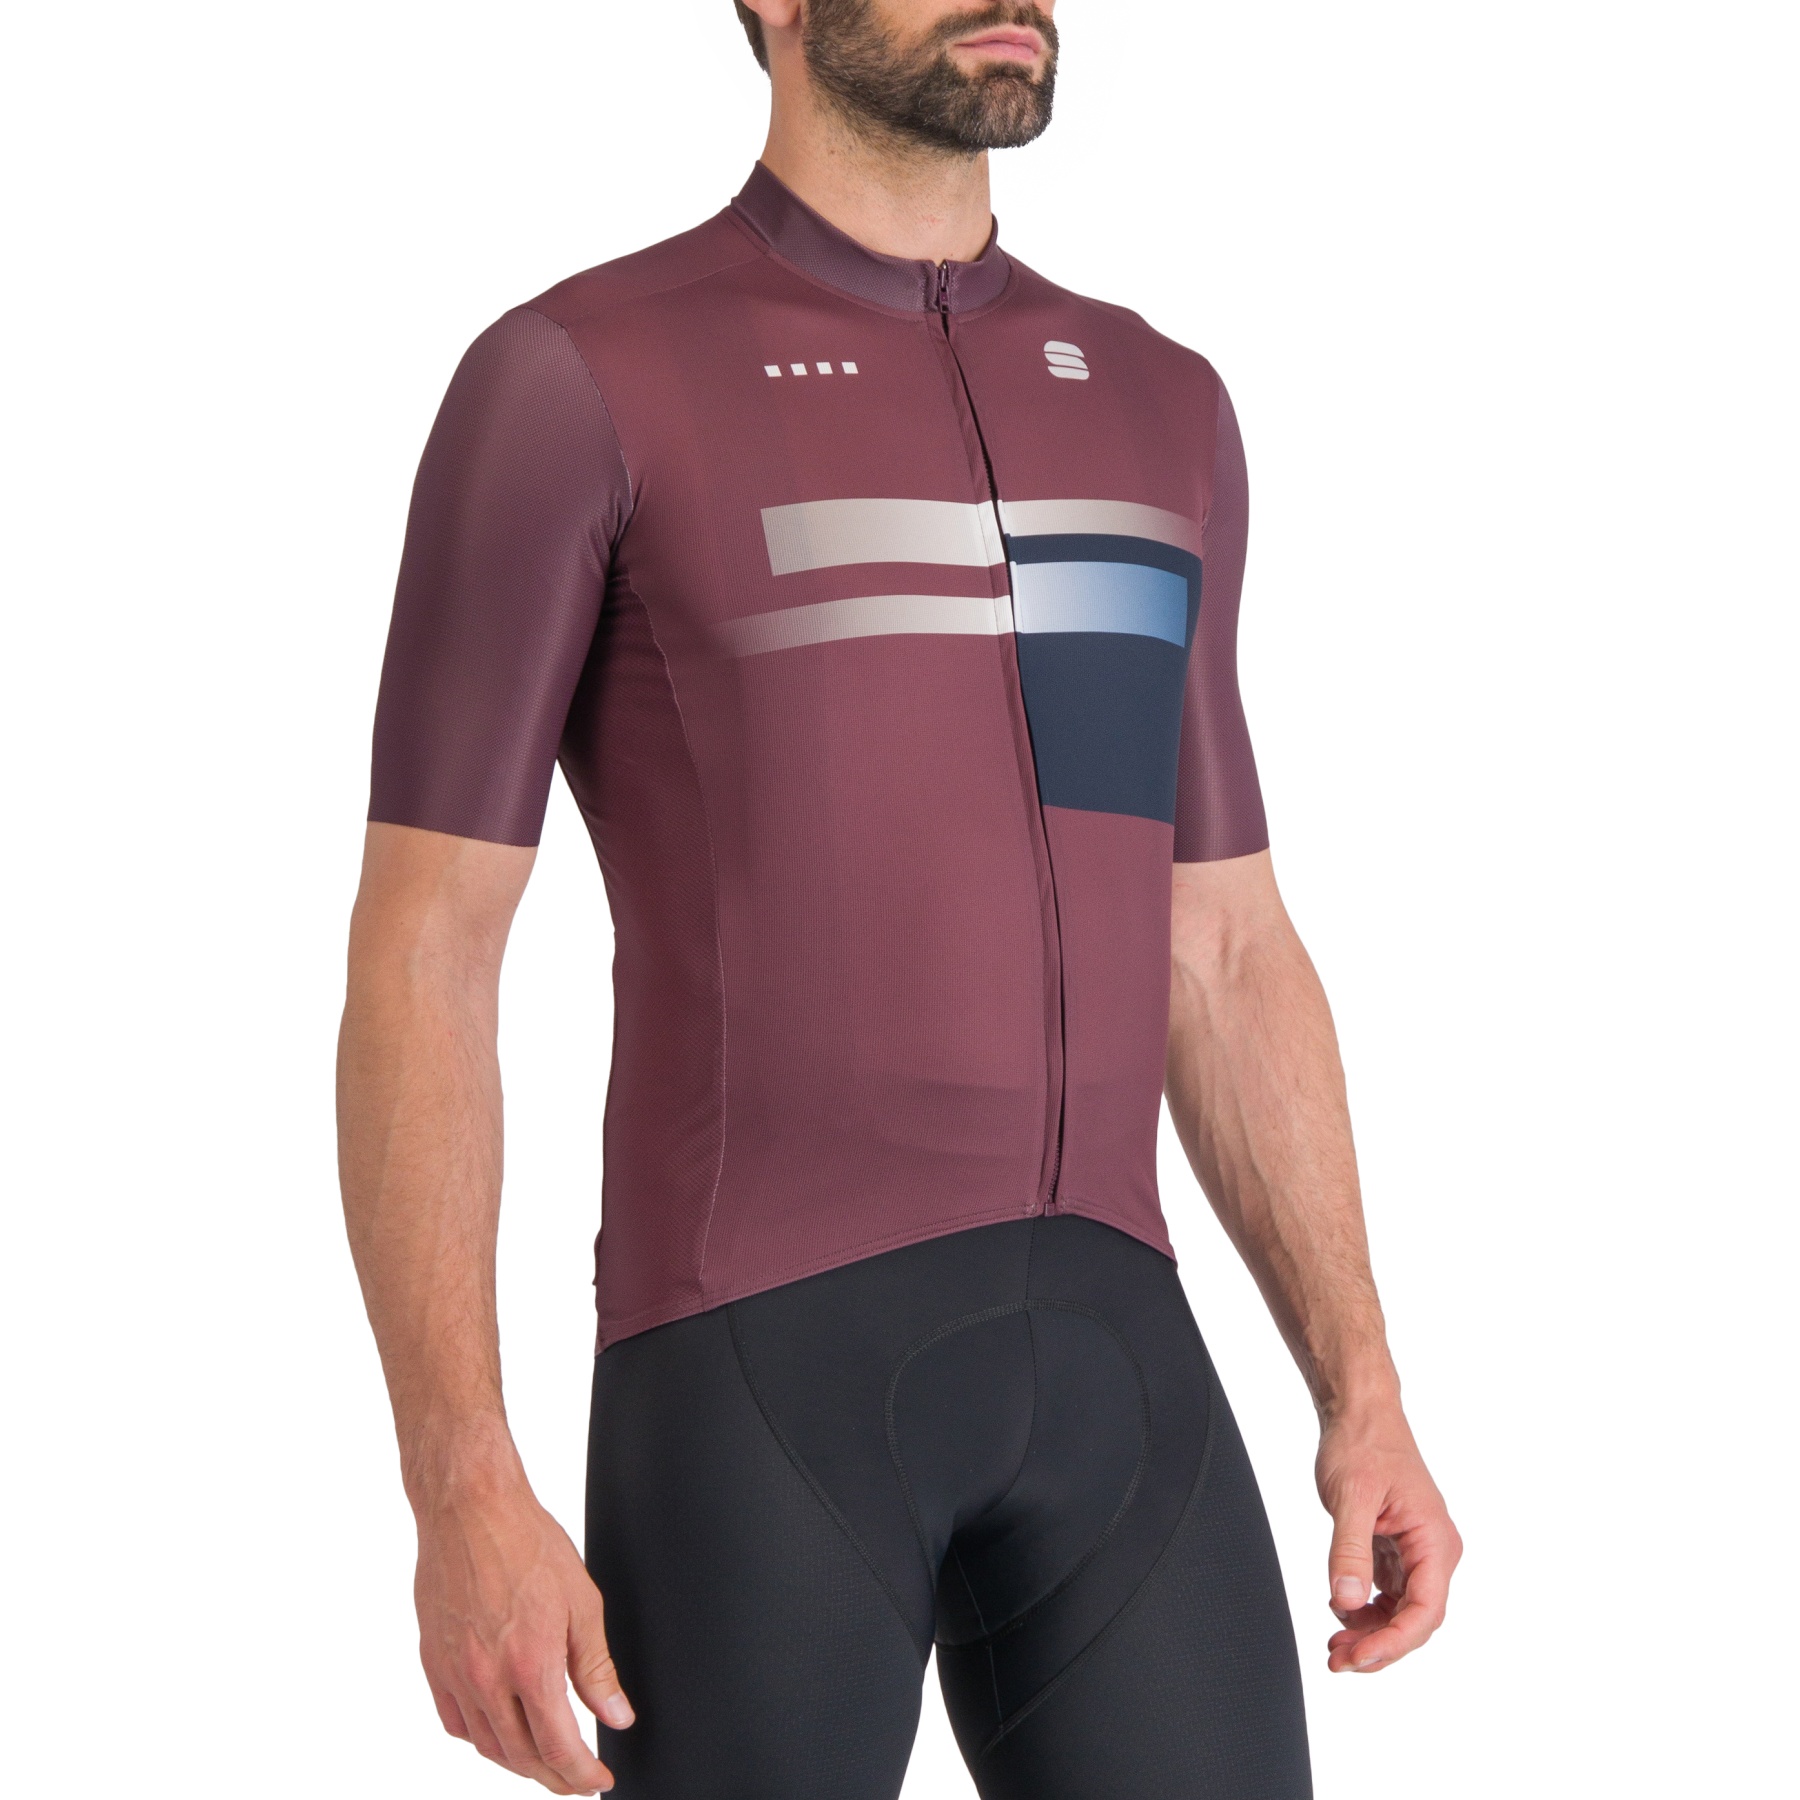 Picture of Sportful Gruppetto Jersey Men - 623 Huckleberry